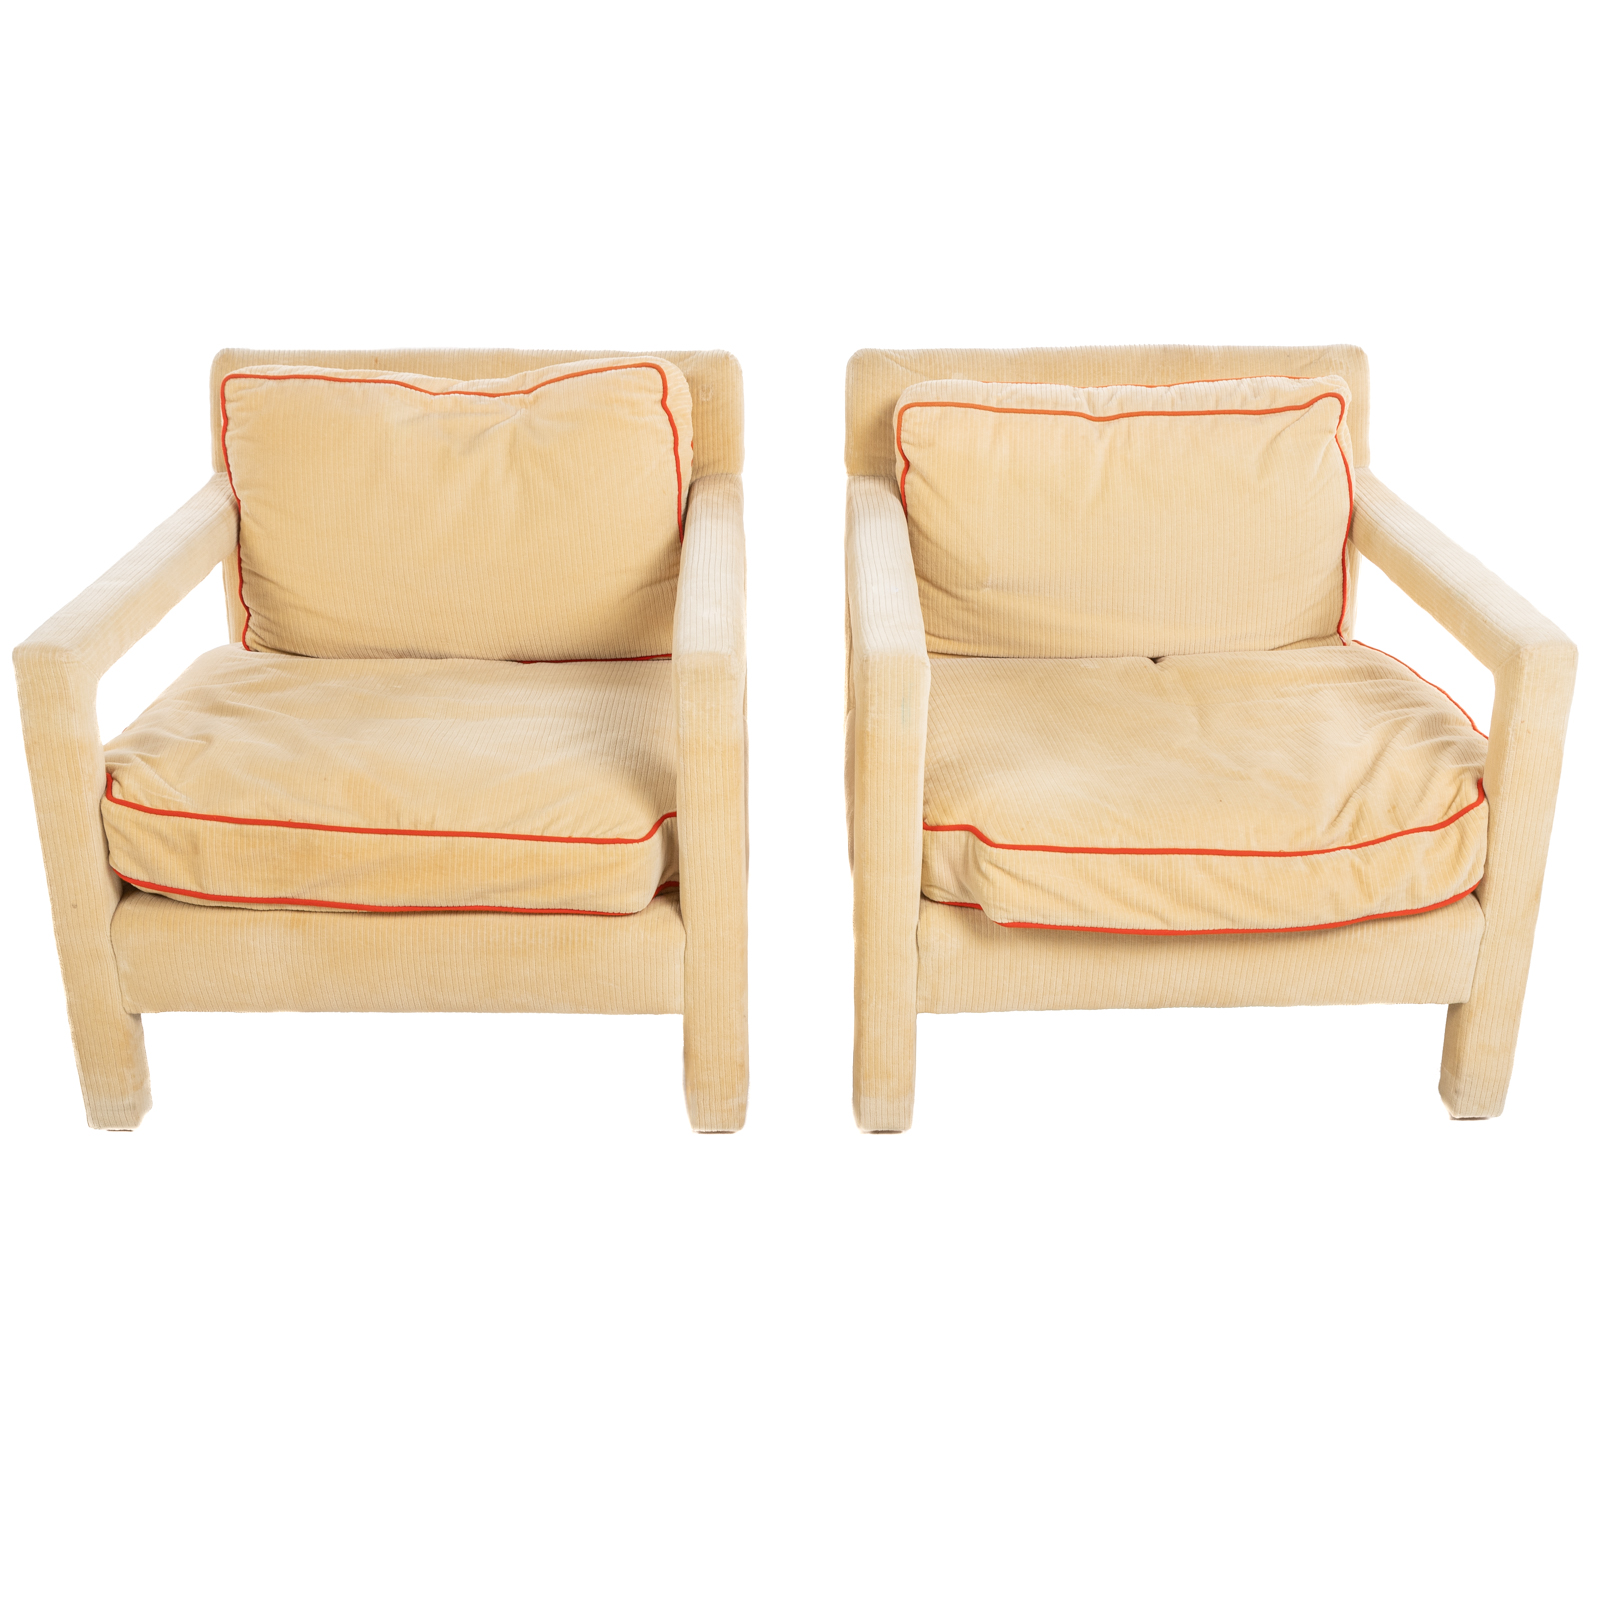 A PAIR OF MODERN UPHOLSTERED CHAIRS 369409